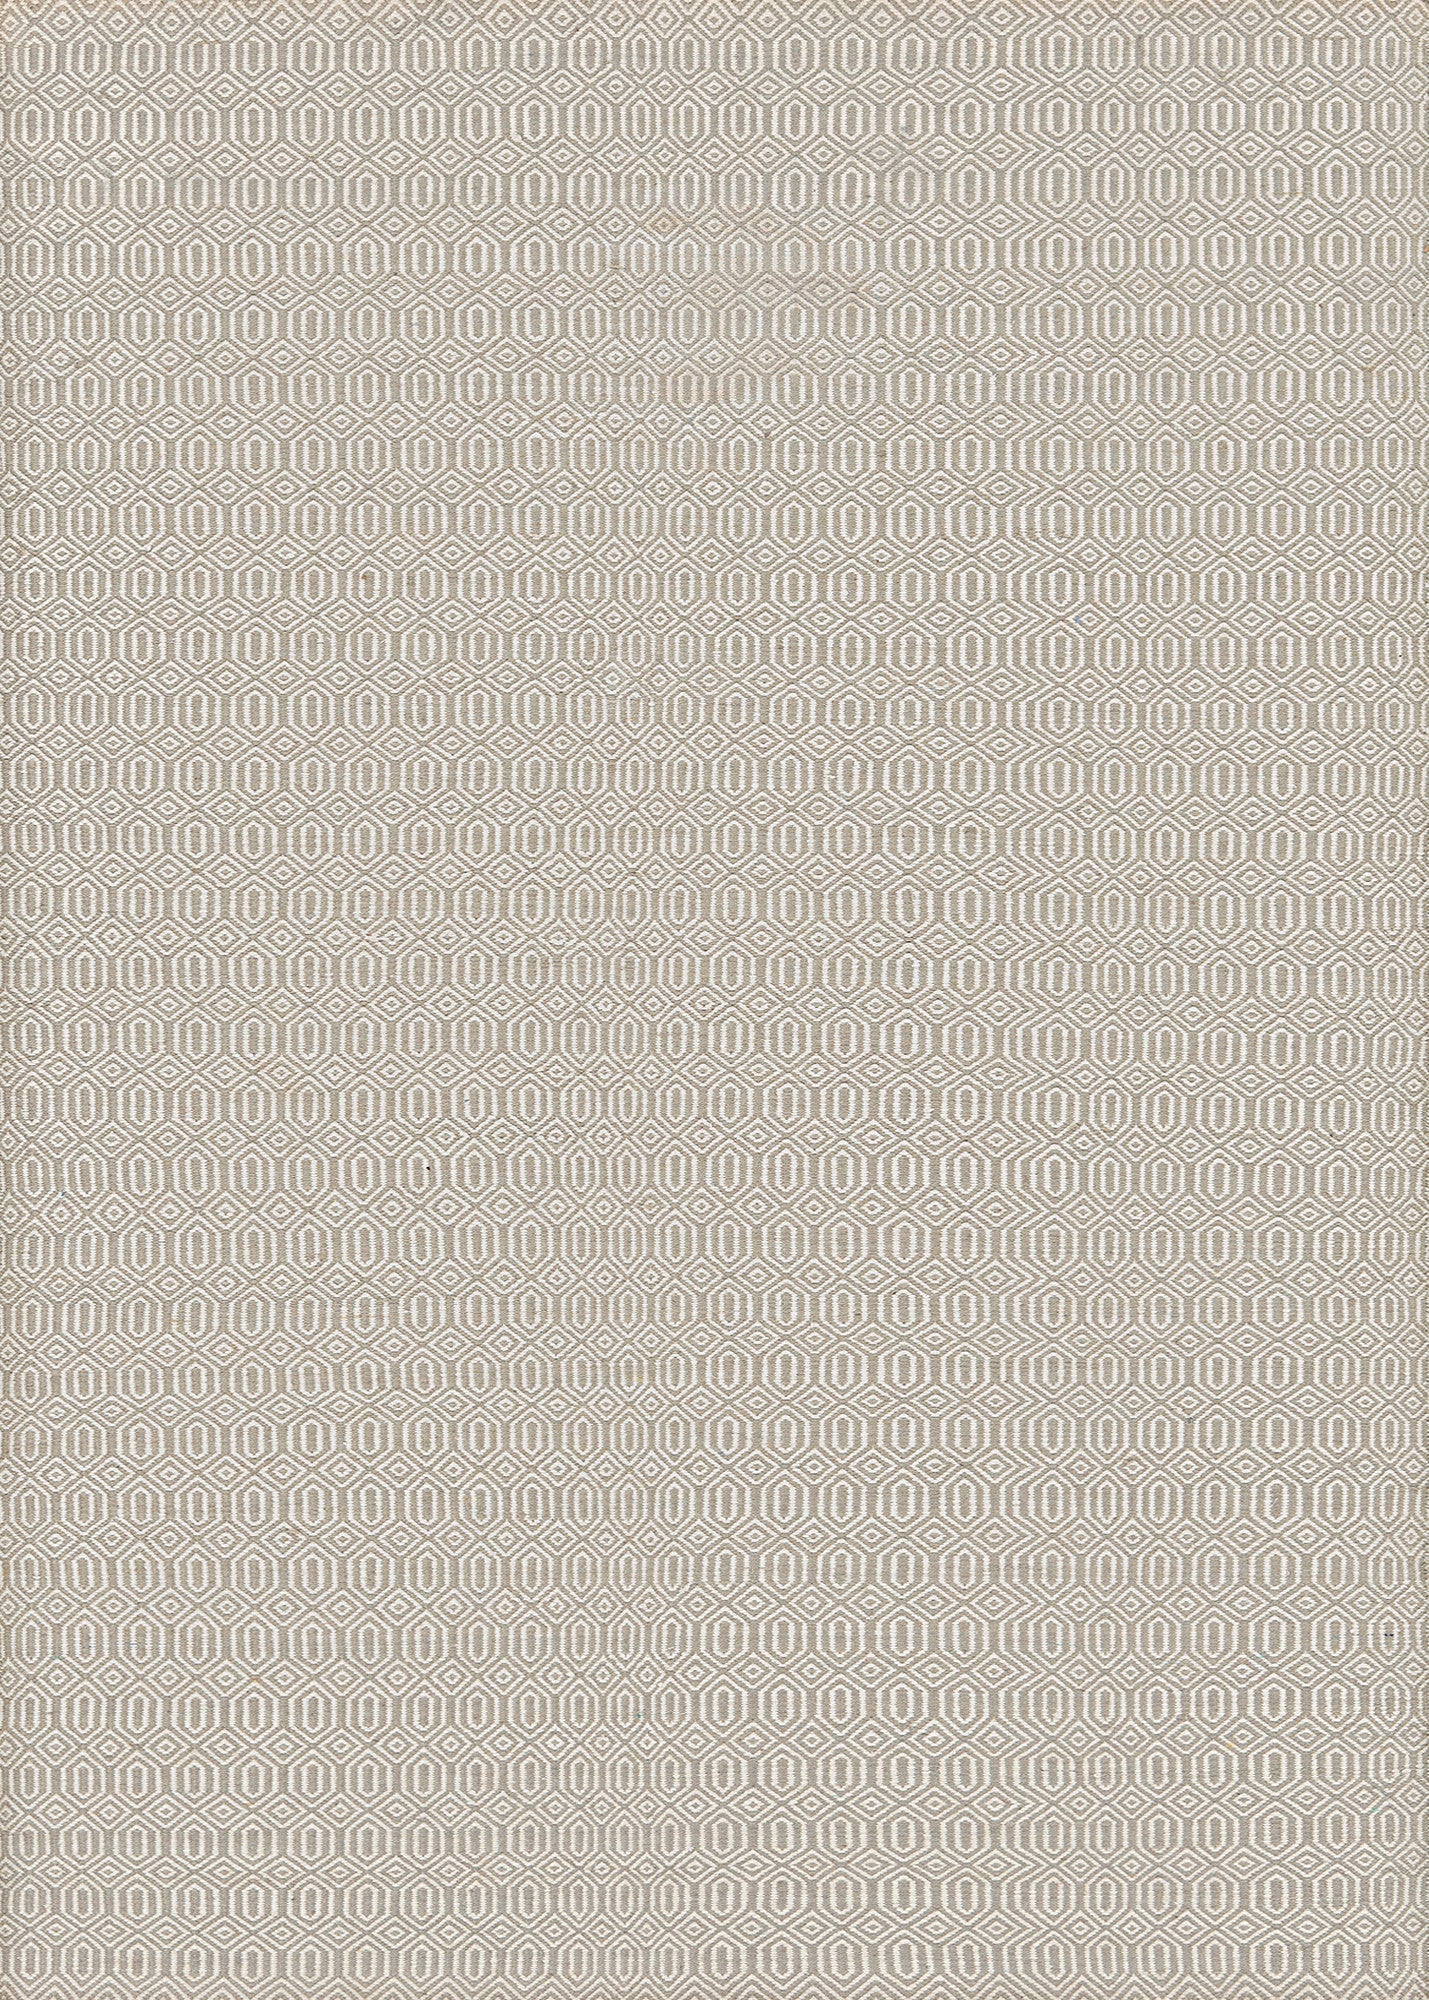 Couristan Cottages Southport Caramel Area Rug